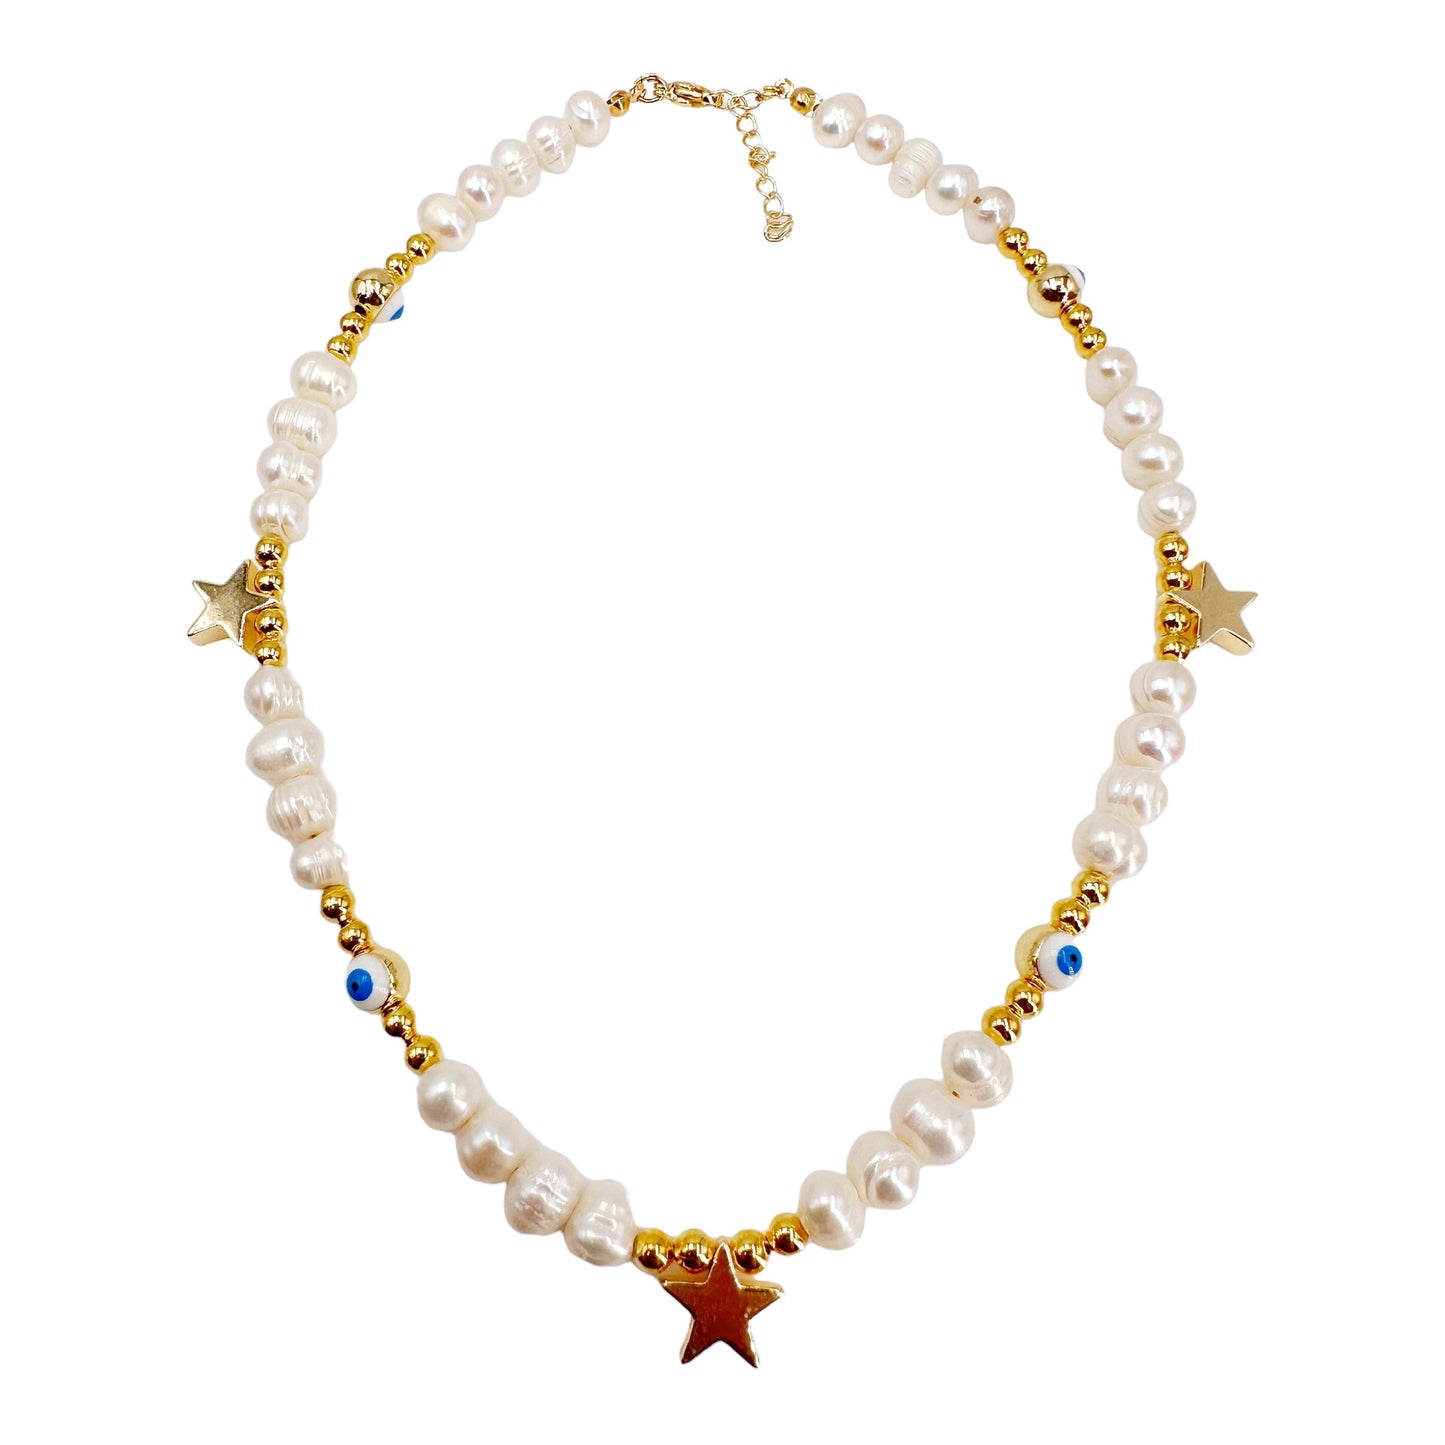 Boho Chic Gold-Plated Choker Necklace with Pearl, Beads, and Starry Accents - Handcrafted by Leslie Boules